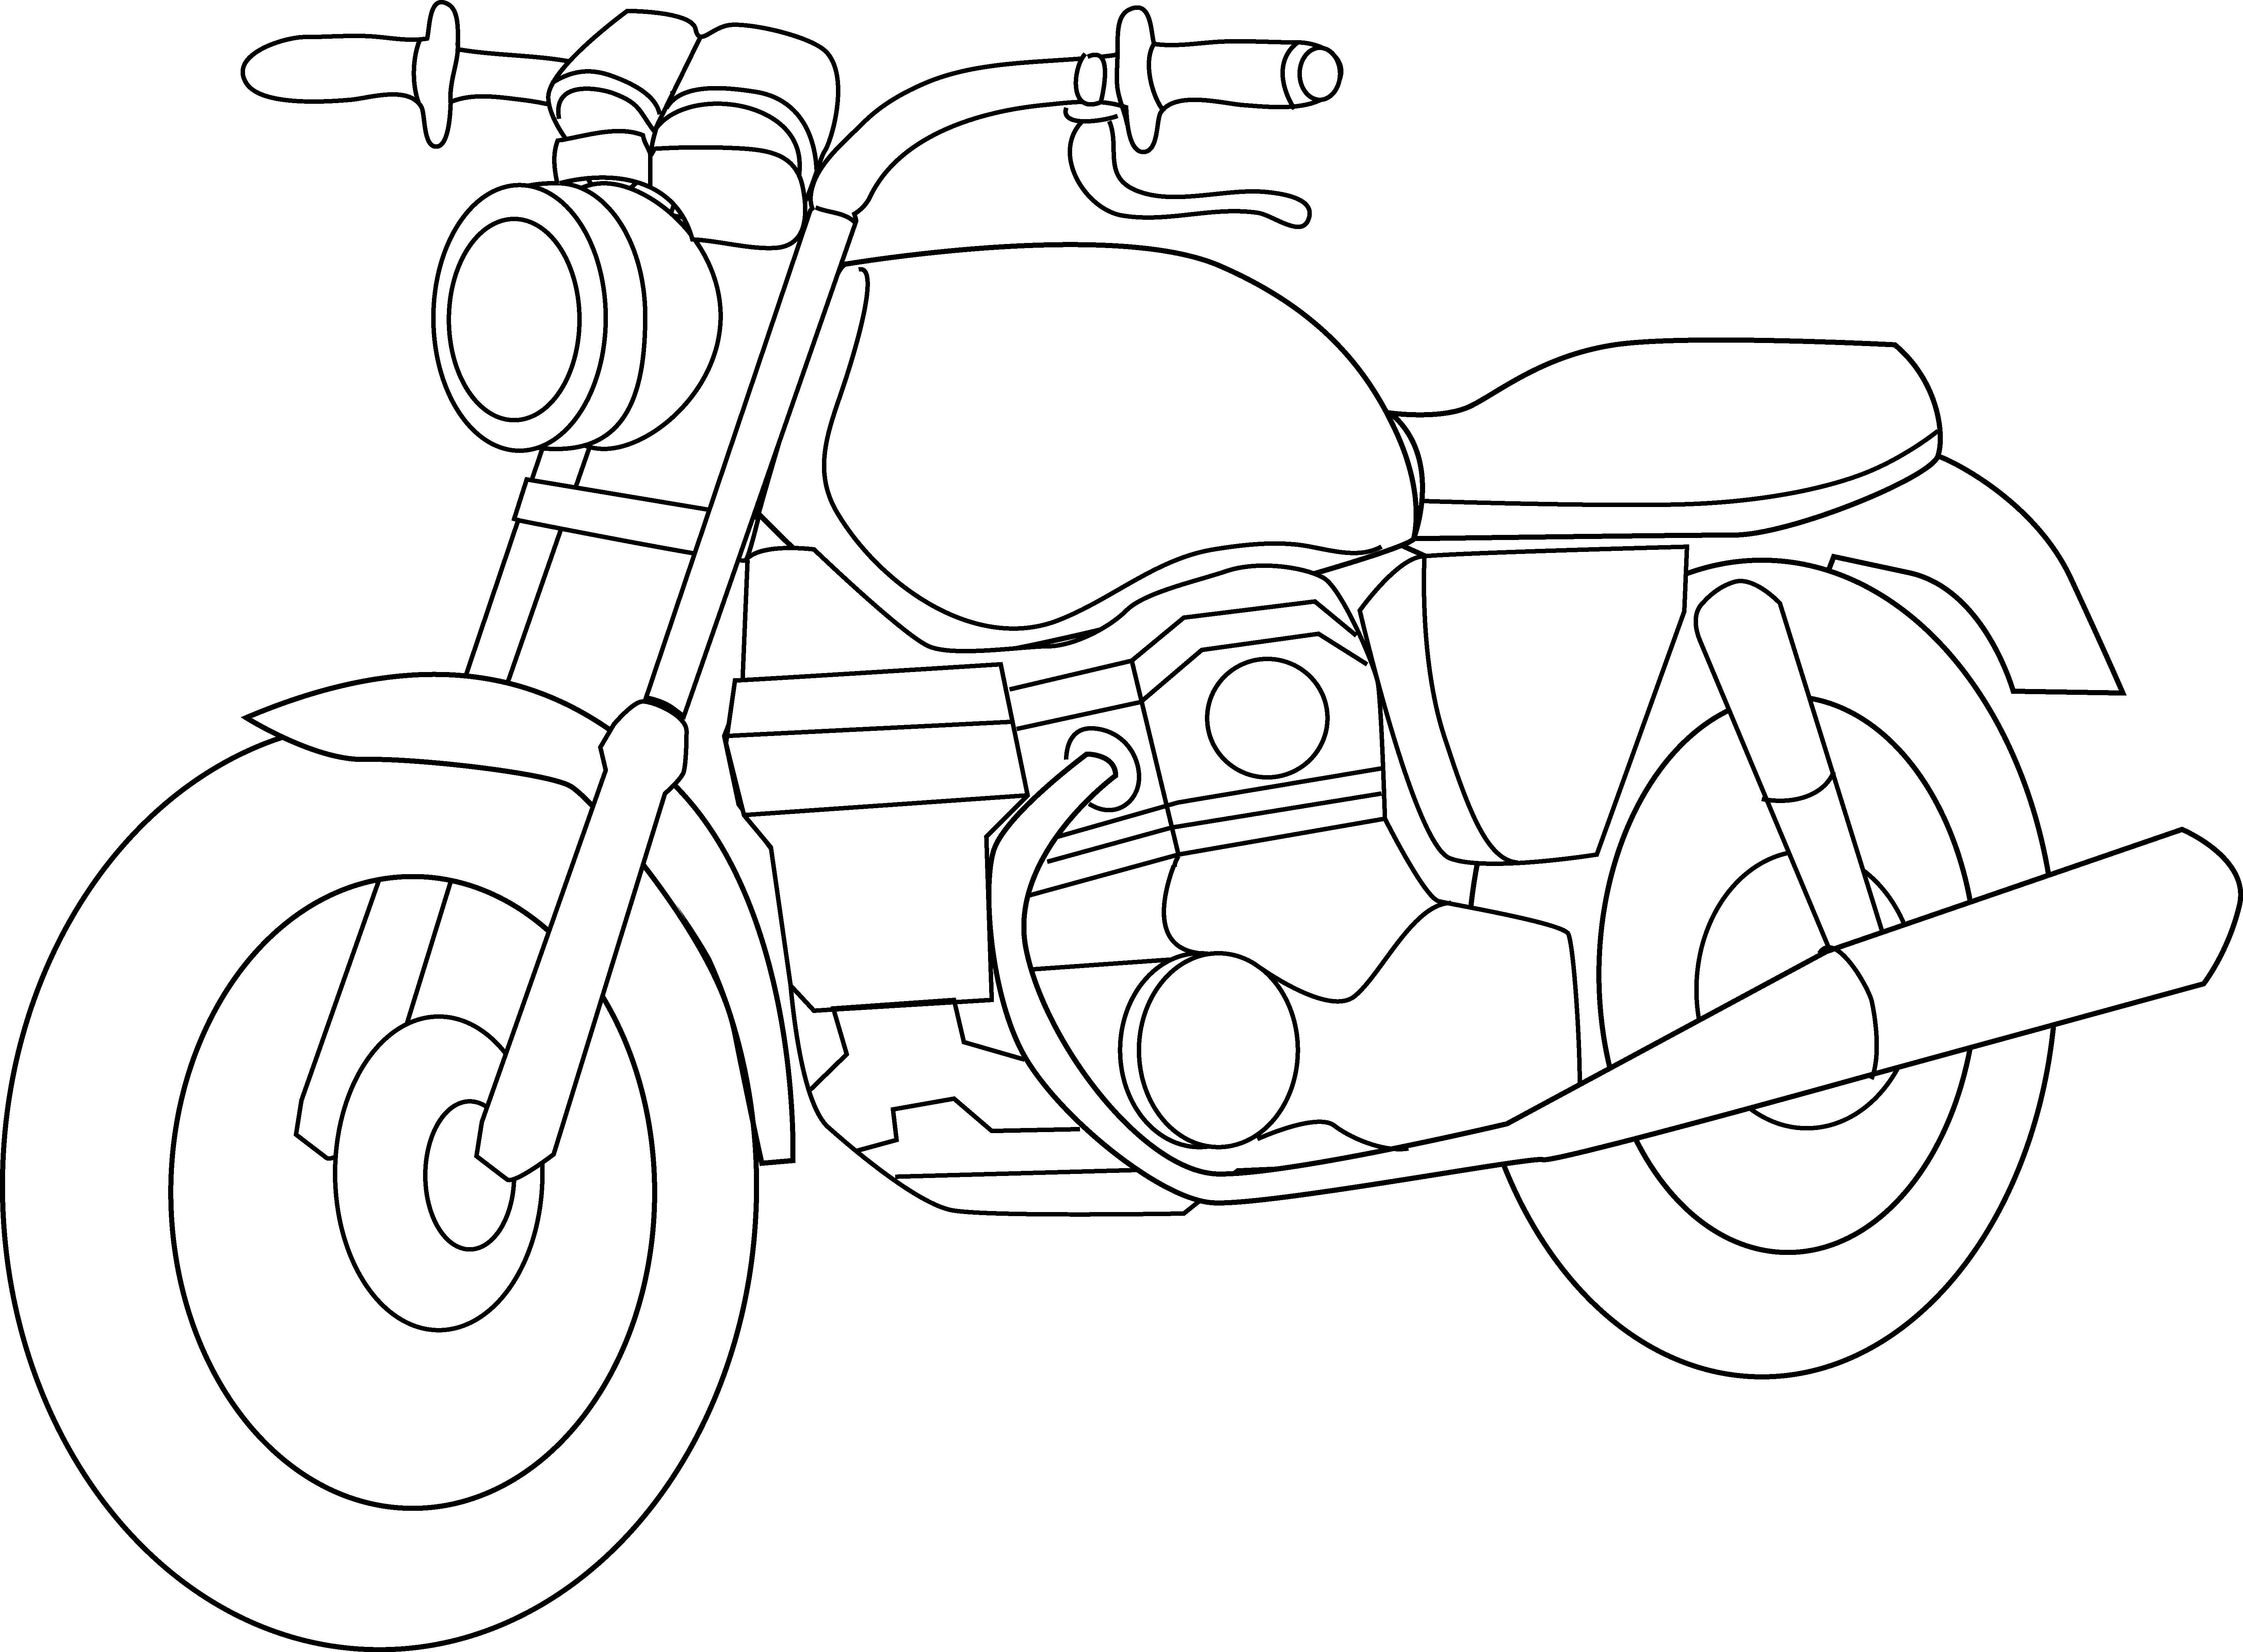 Free Images Motorcycles, Download Free Images Motorcycles png images